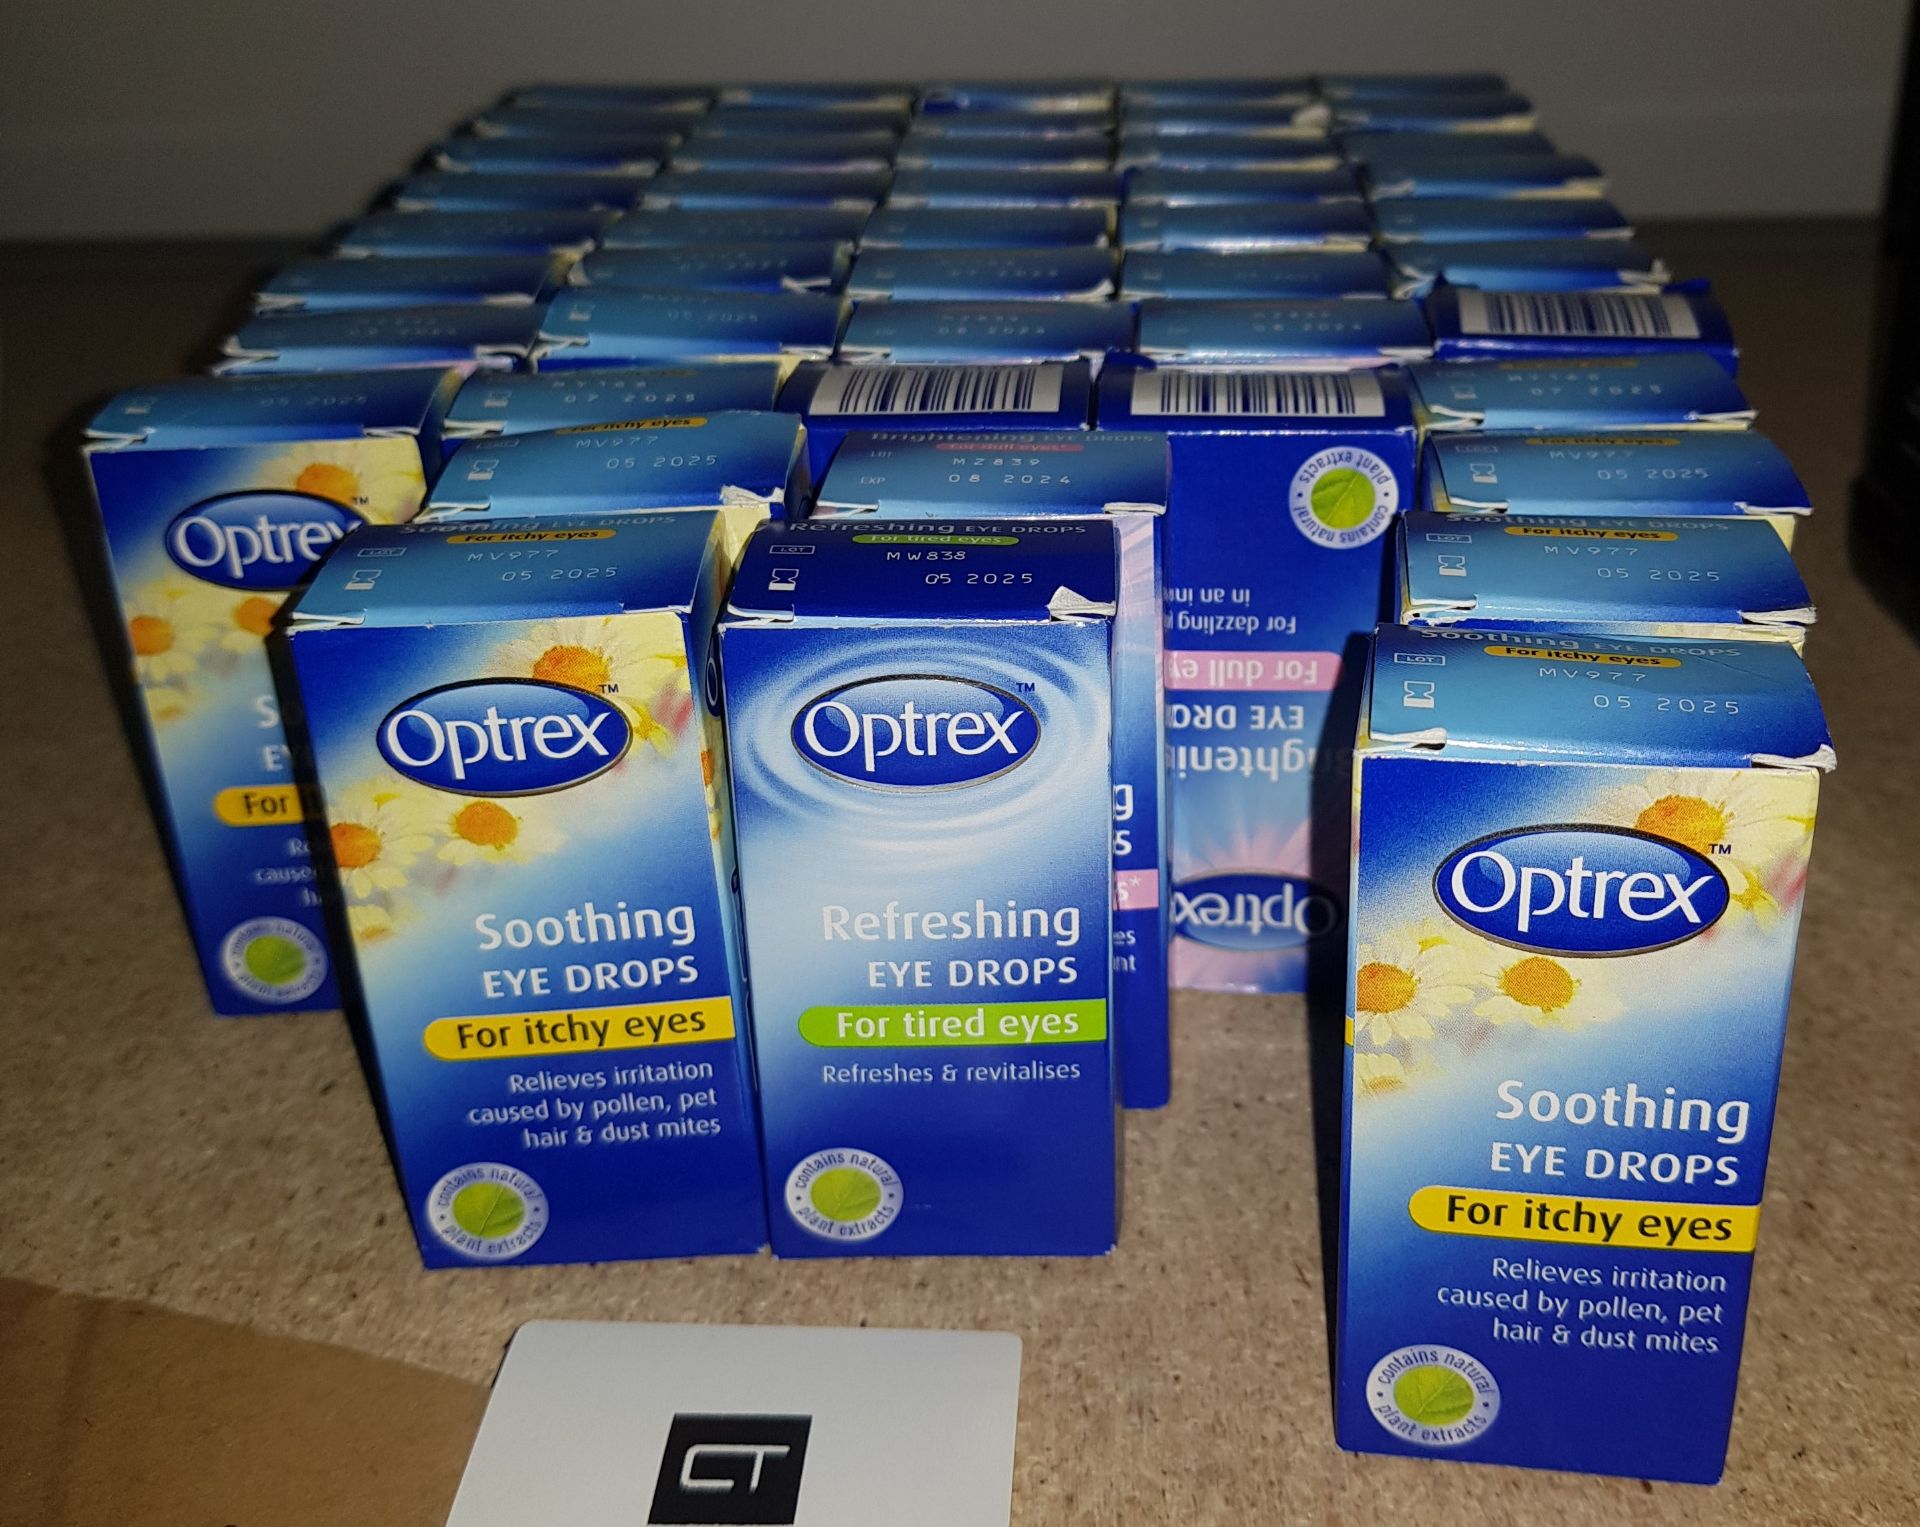 47 X BRAND NEW OPTREX EYE DROPS IN 3 TYPES - REFRESHING FOR TIRED EYES / SOOTHING FOR ITCHY EYES /